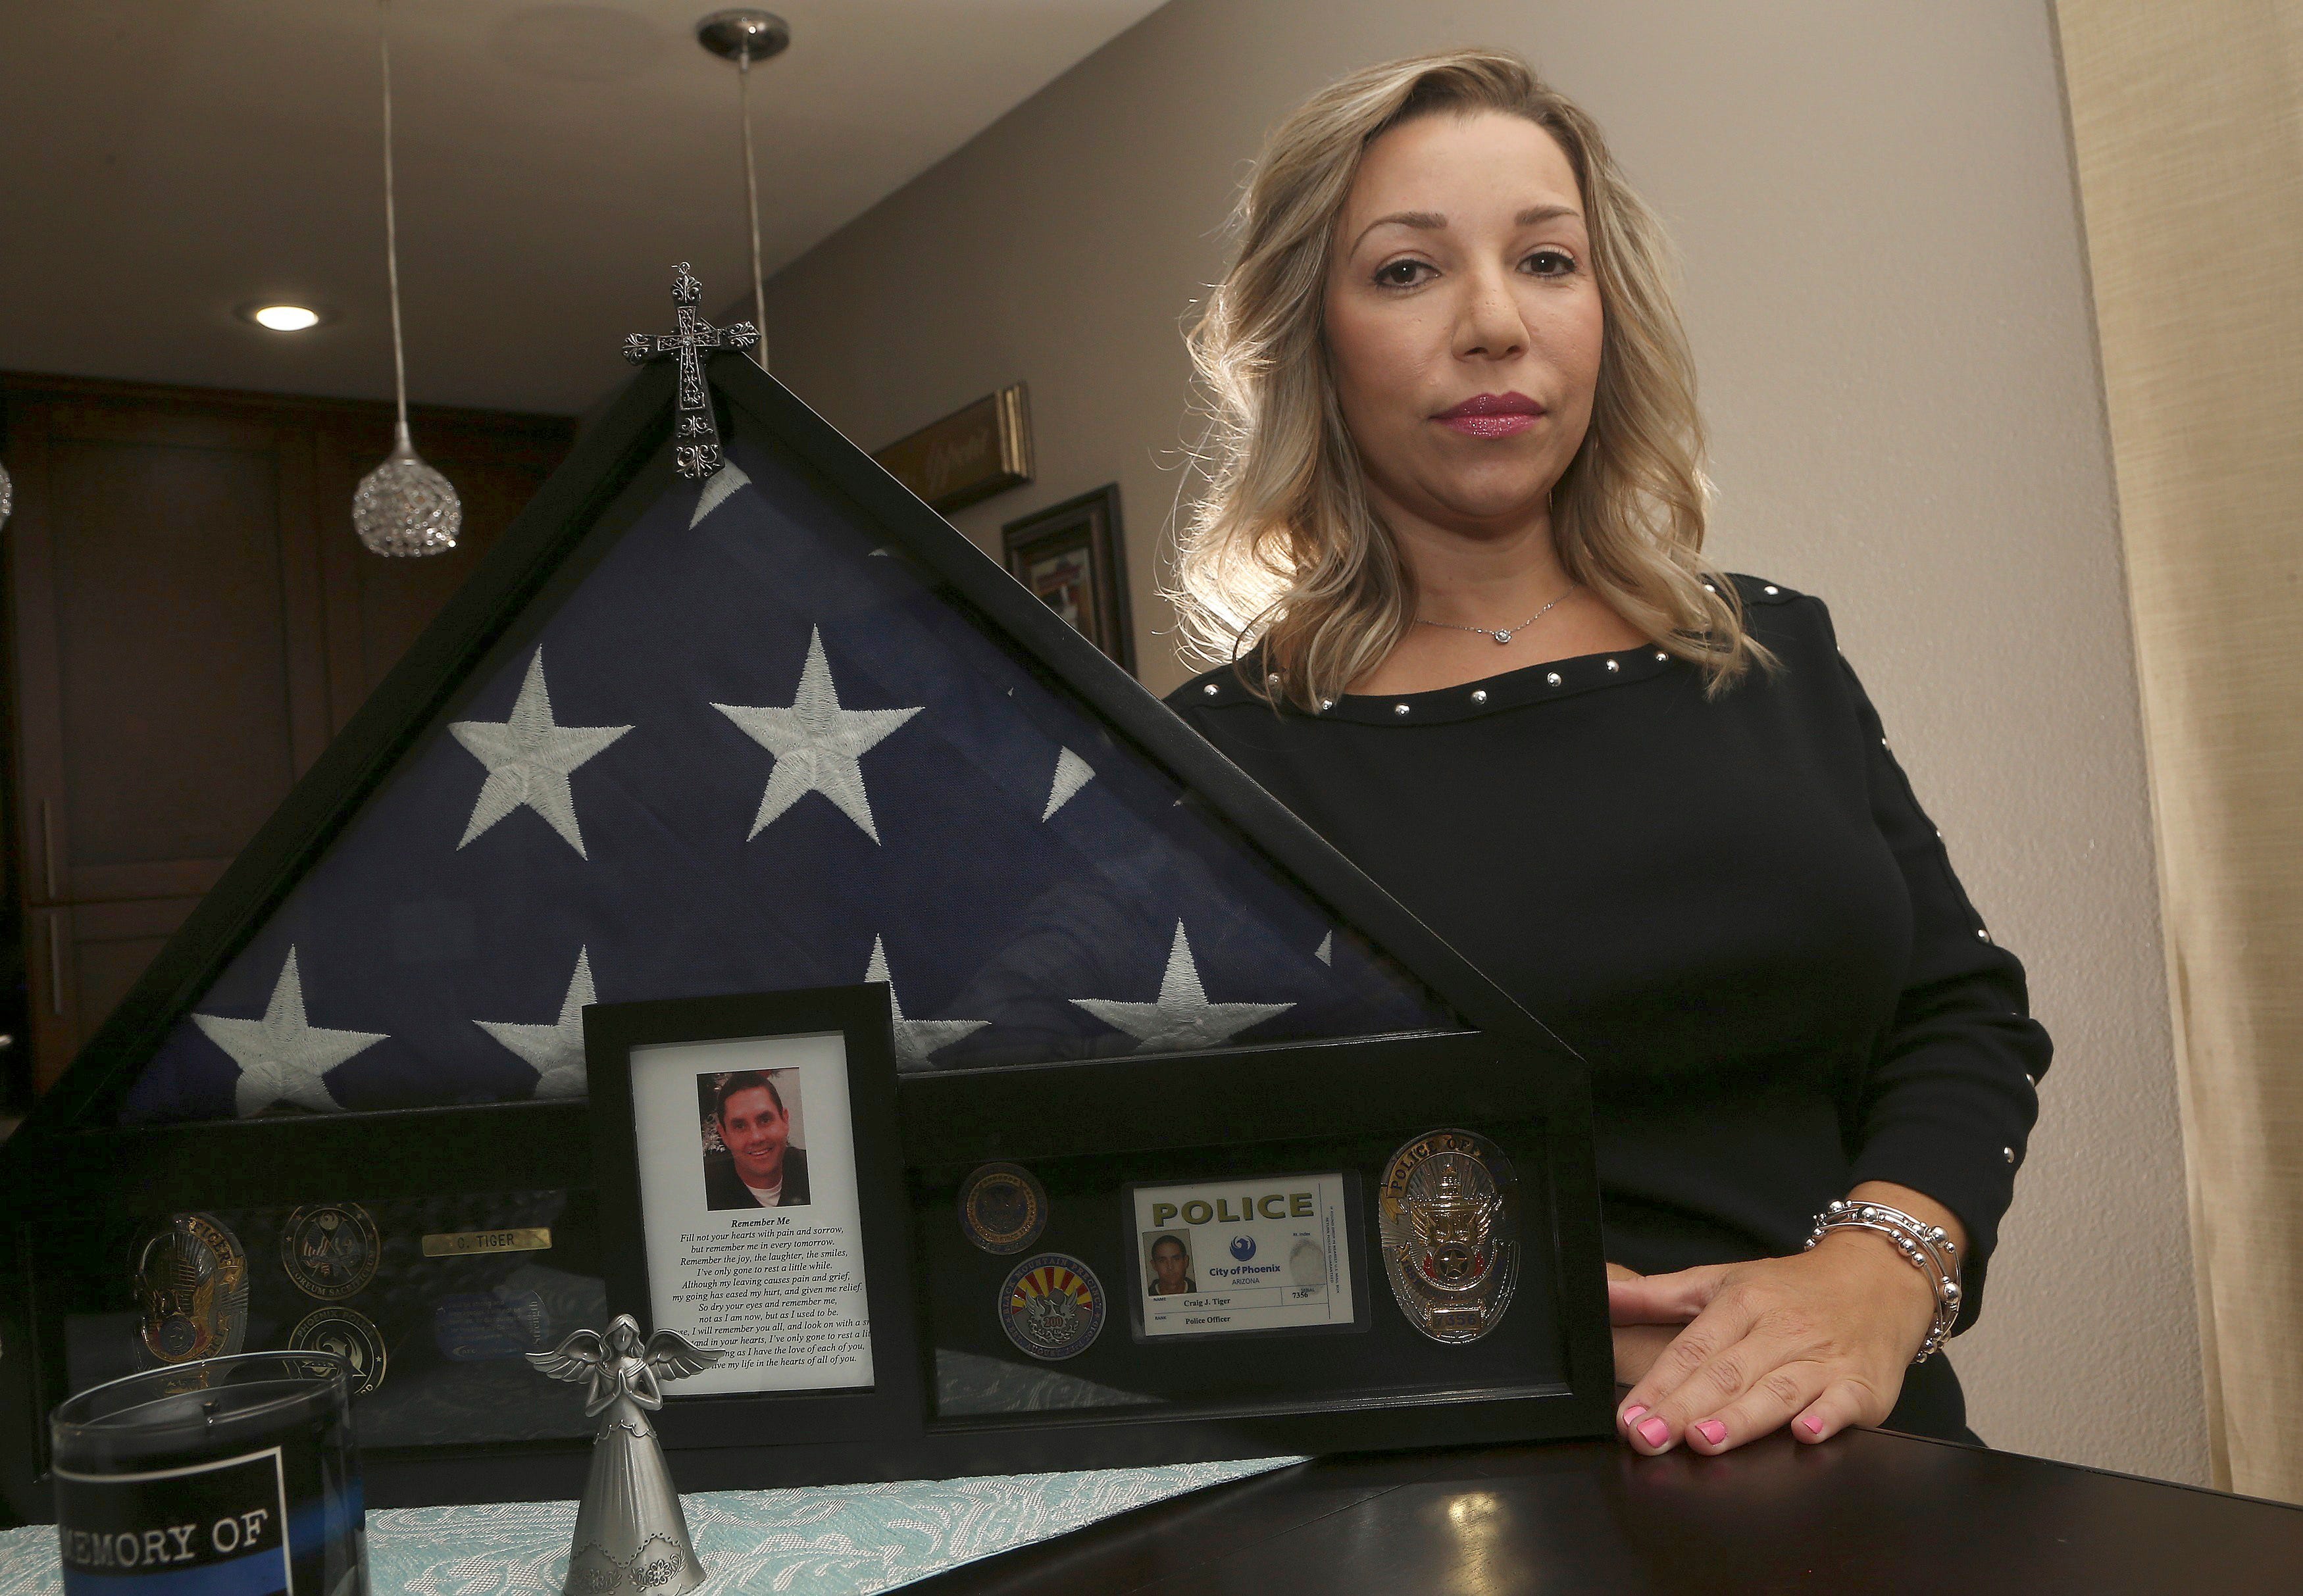 Rebecca Tiger, a former Phoenix police officer, is the ex-wife of Craig Tiger, a Phoenix police officer who took his own life a few years ago following a fatal shooting he was involved in, shown her home Monday, July 1, 2019, in Scottsdale, Ariz. Officer Craig Tiger suffered from post-traumatic stress disorder after fatally shooting a man while on duty back in 2012, and took his own life two years later.